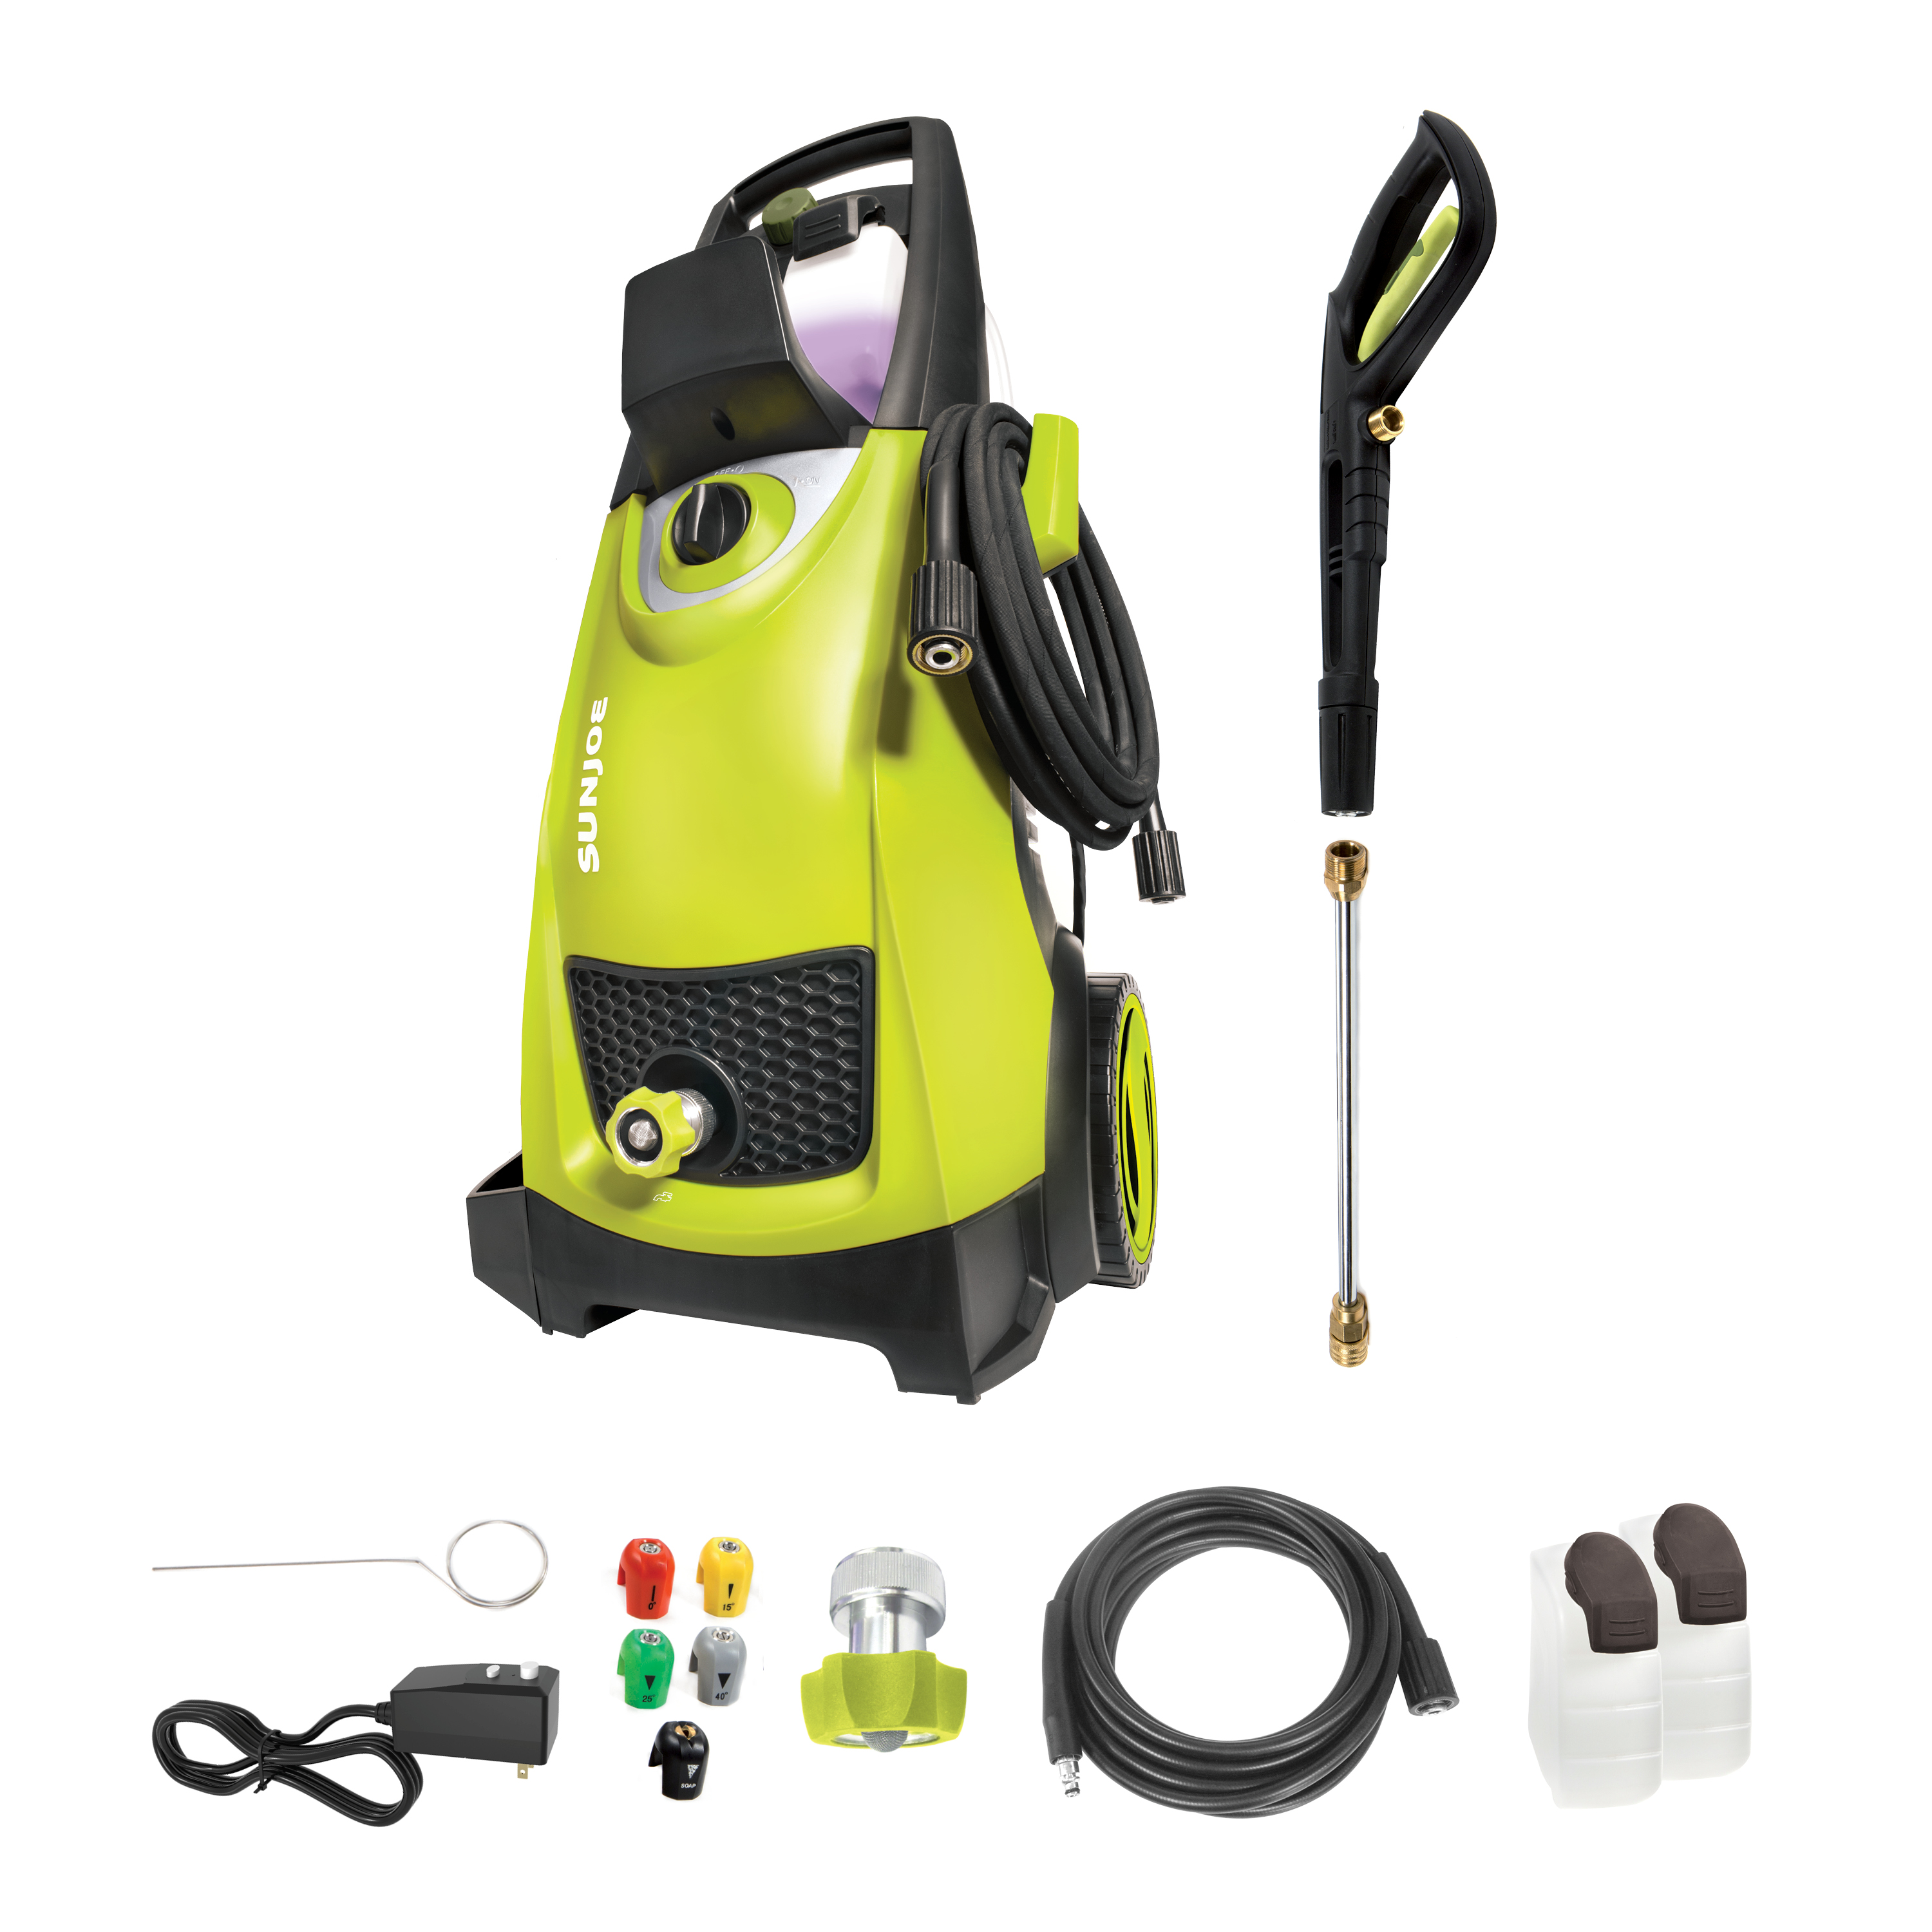 Sun Joe SPX3000 Electric Pressure Washer, 14.5-Amp, Quick-Connect Tips - image 4 of 25